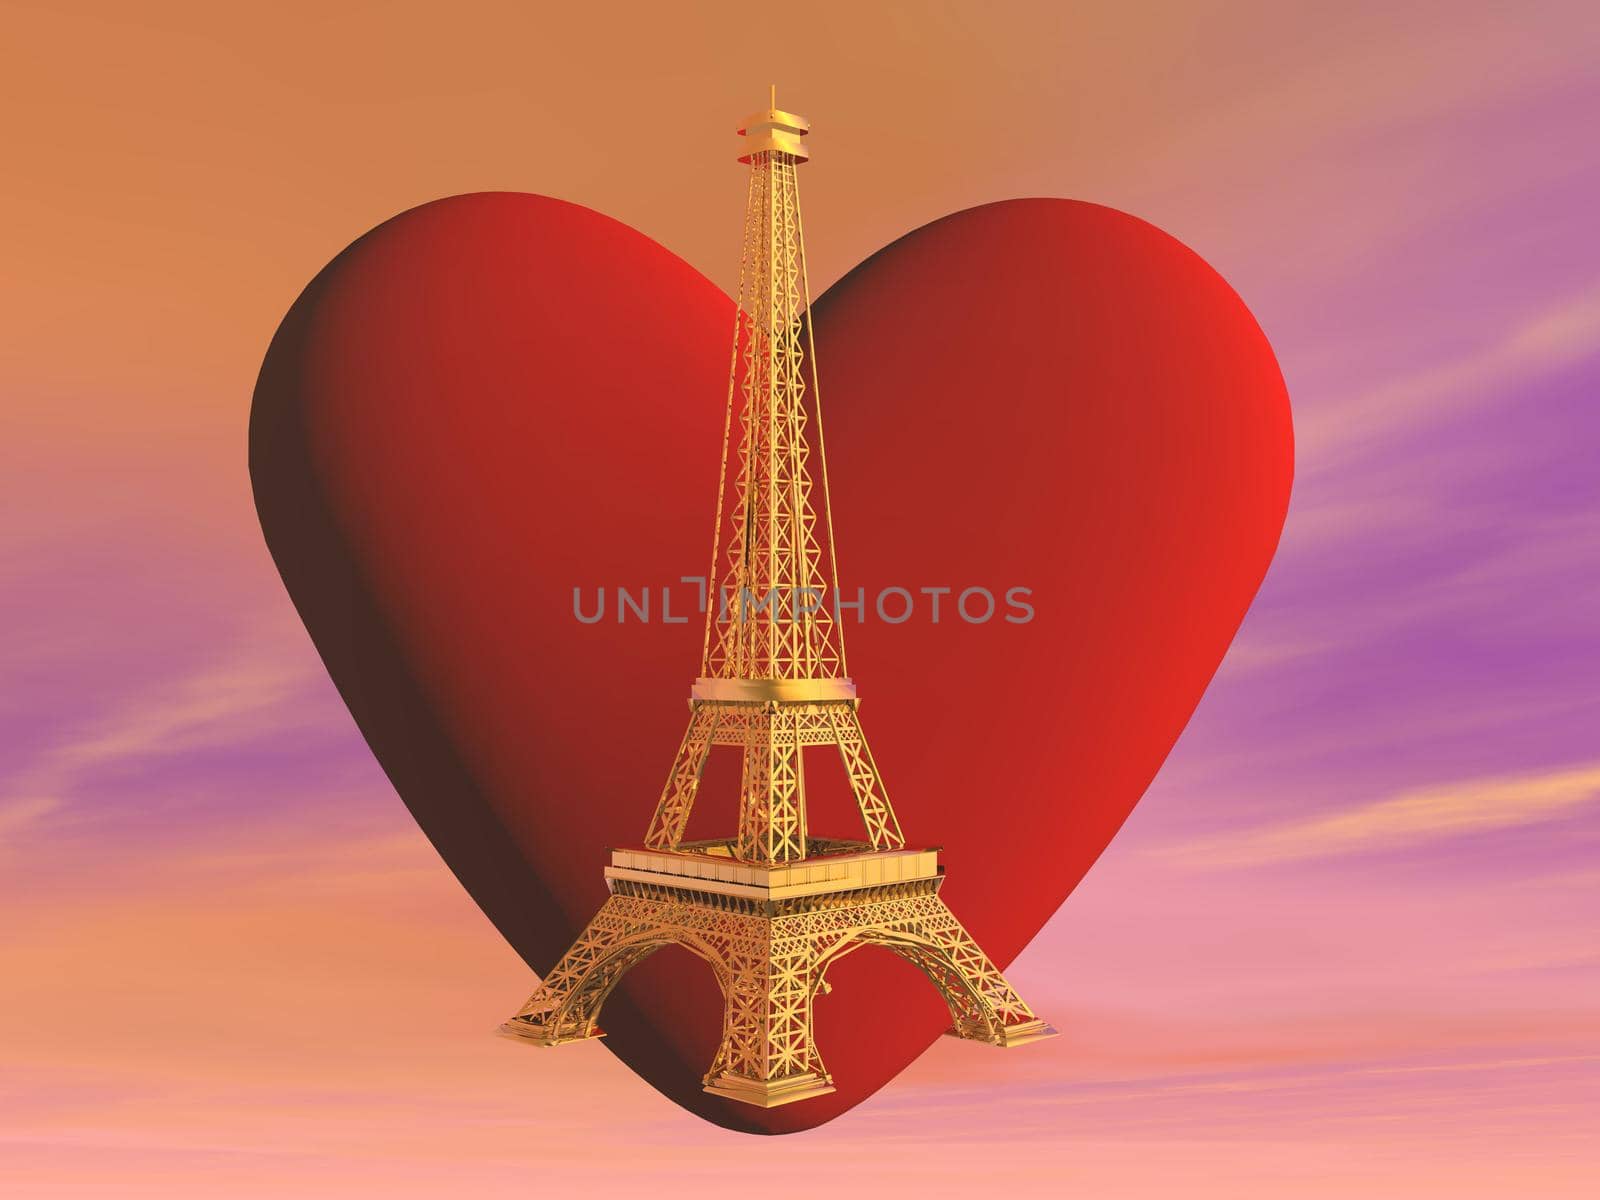 French golden Eiffel tower in front of red heart shape into pink cloudy sky, Paris, France